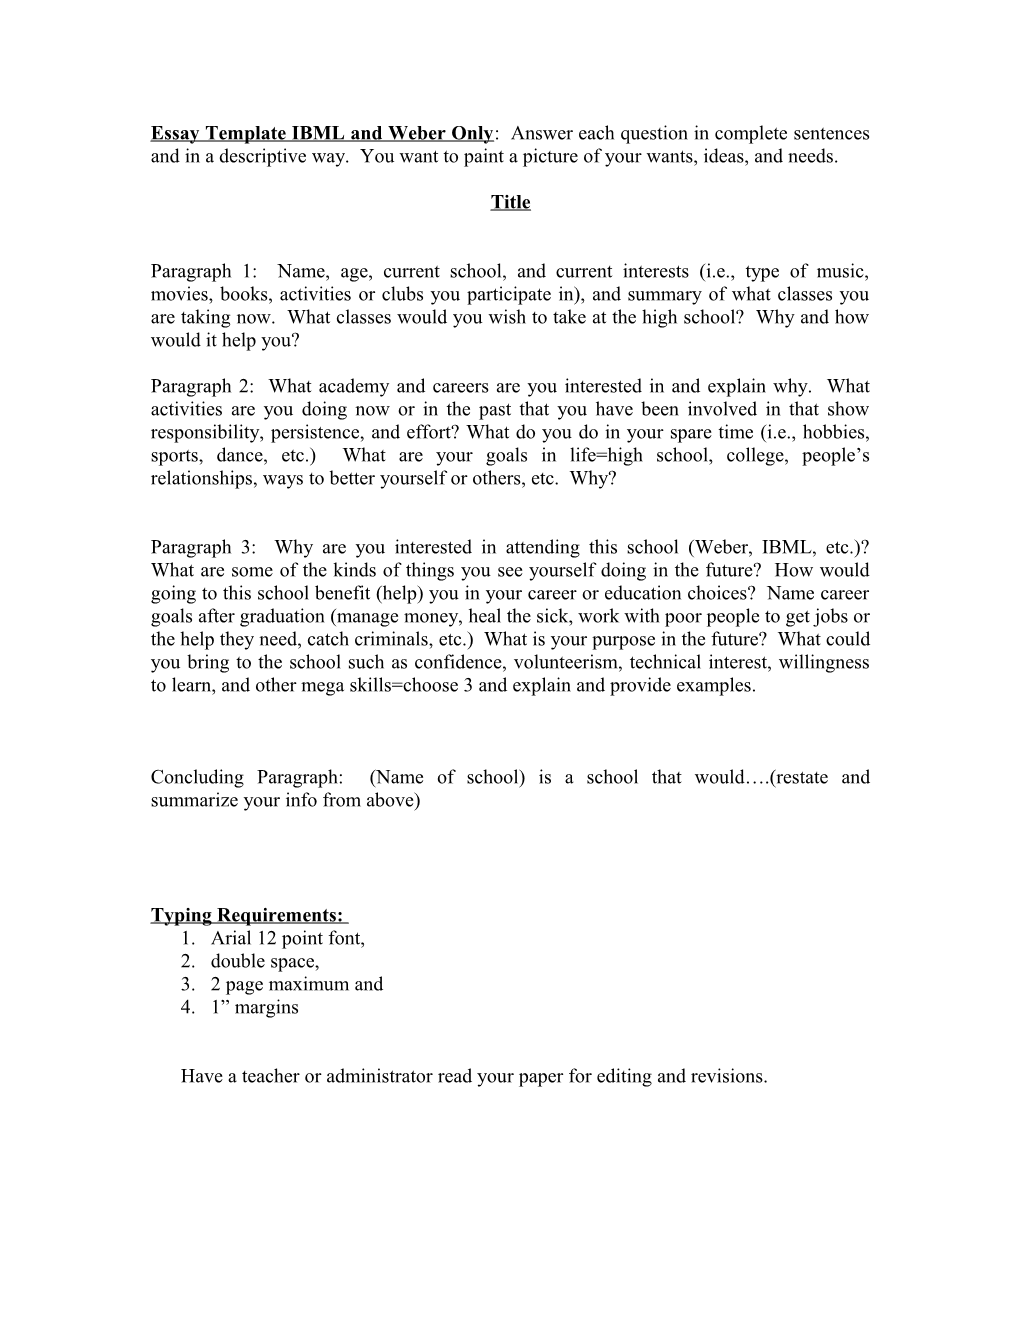 Essay Template Directions: Answer Each Question in Complete Sentences and in a Descriptive Way